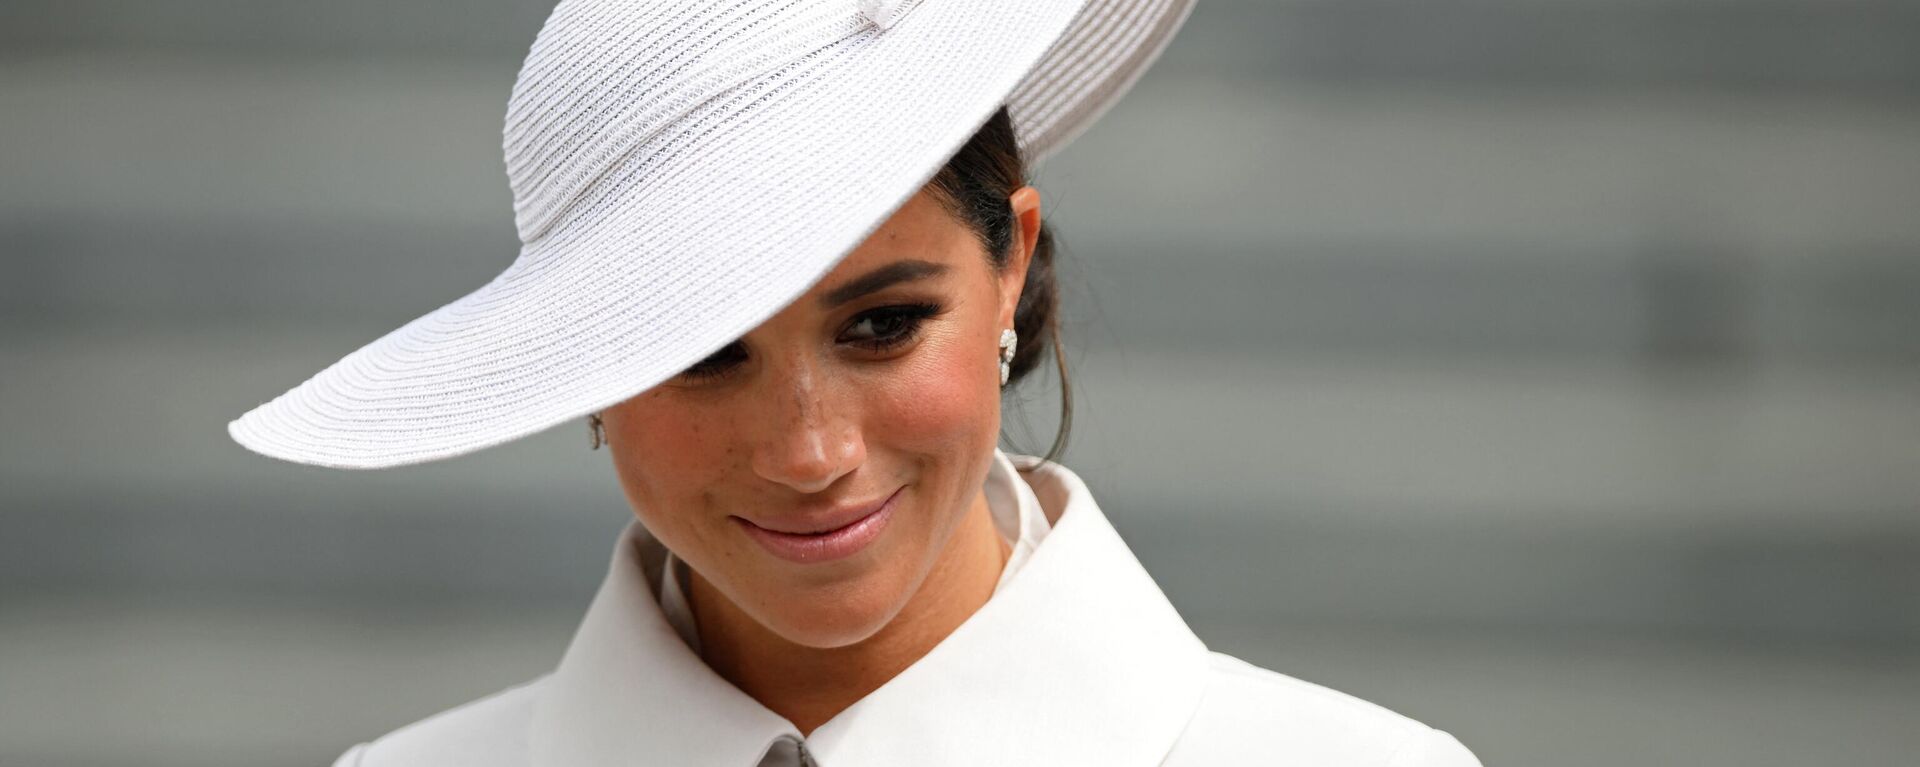 Meghan, Duchess of Sussex leaves after attending the National Service of Thanksgiving for The Queen's reign at Saint Paul's Cathedral in London on June 3, 2022 as part of Queen Elizabeth II's platinum jubilee celebrations - Sputnik International, 1920, 27.08.2022